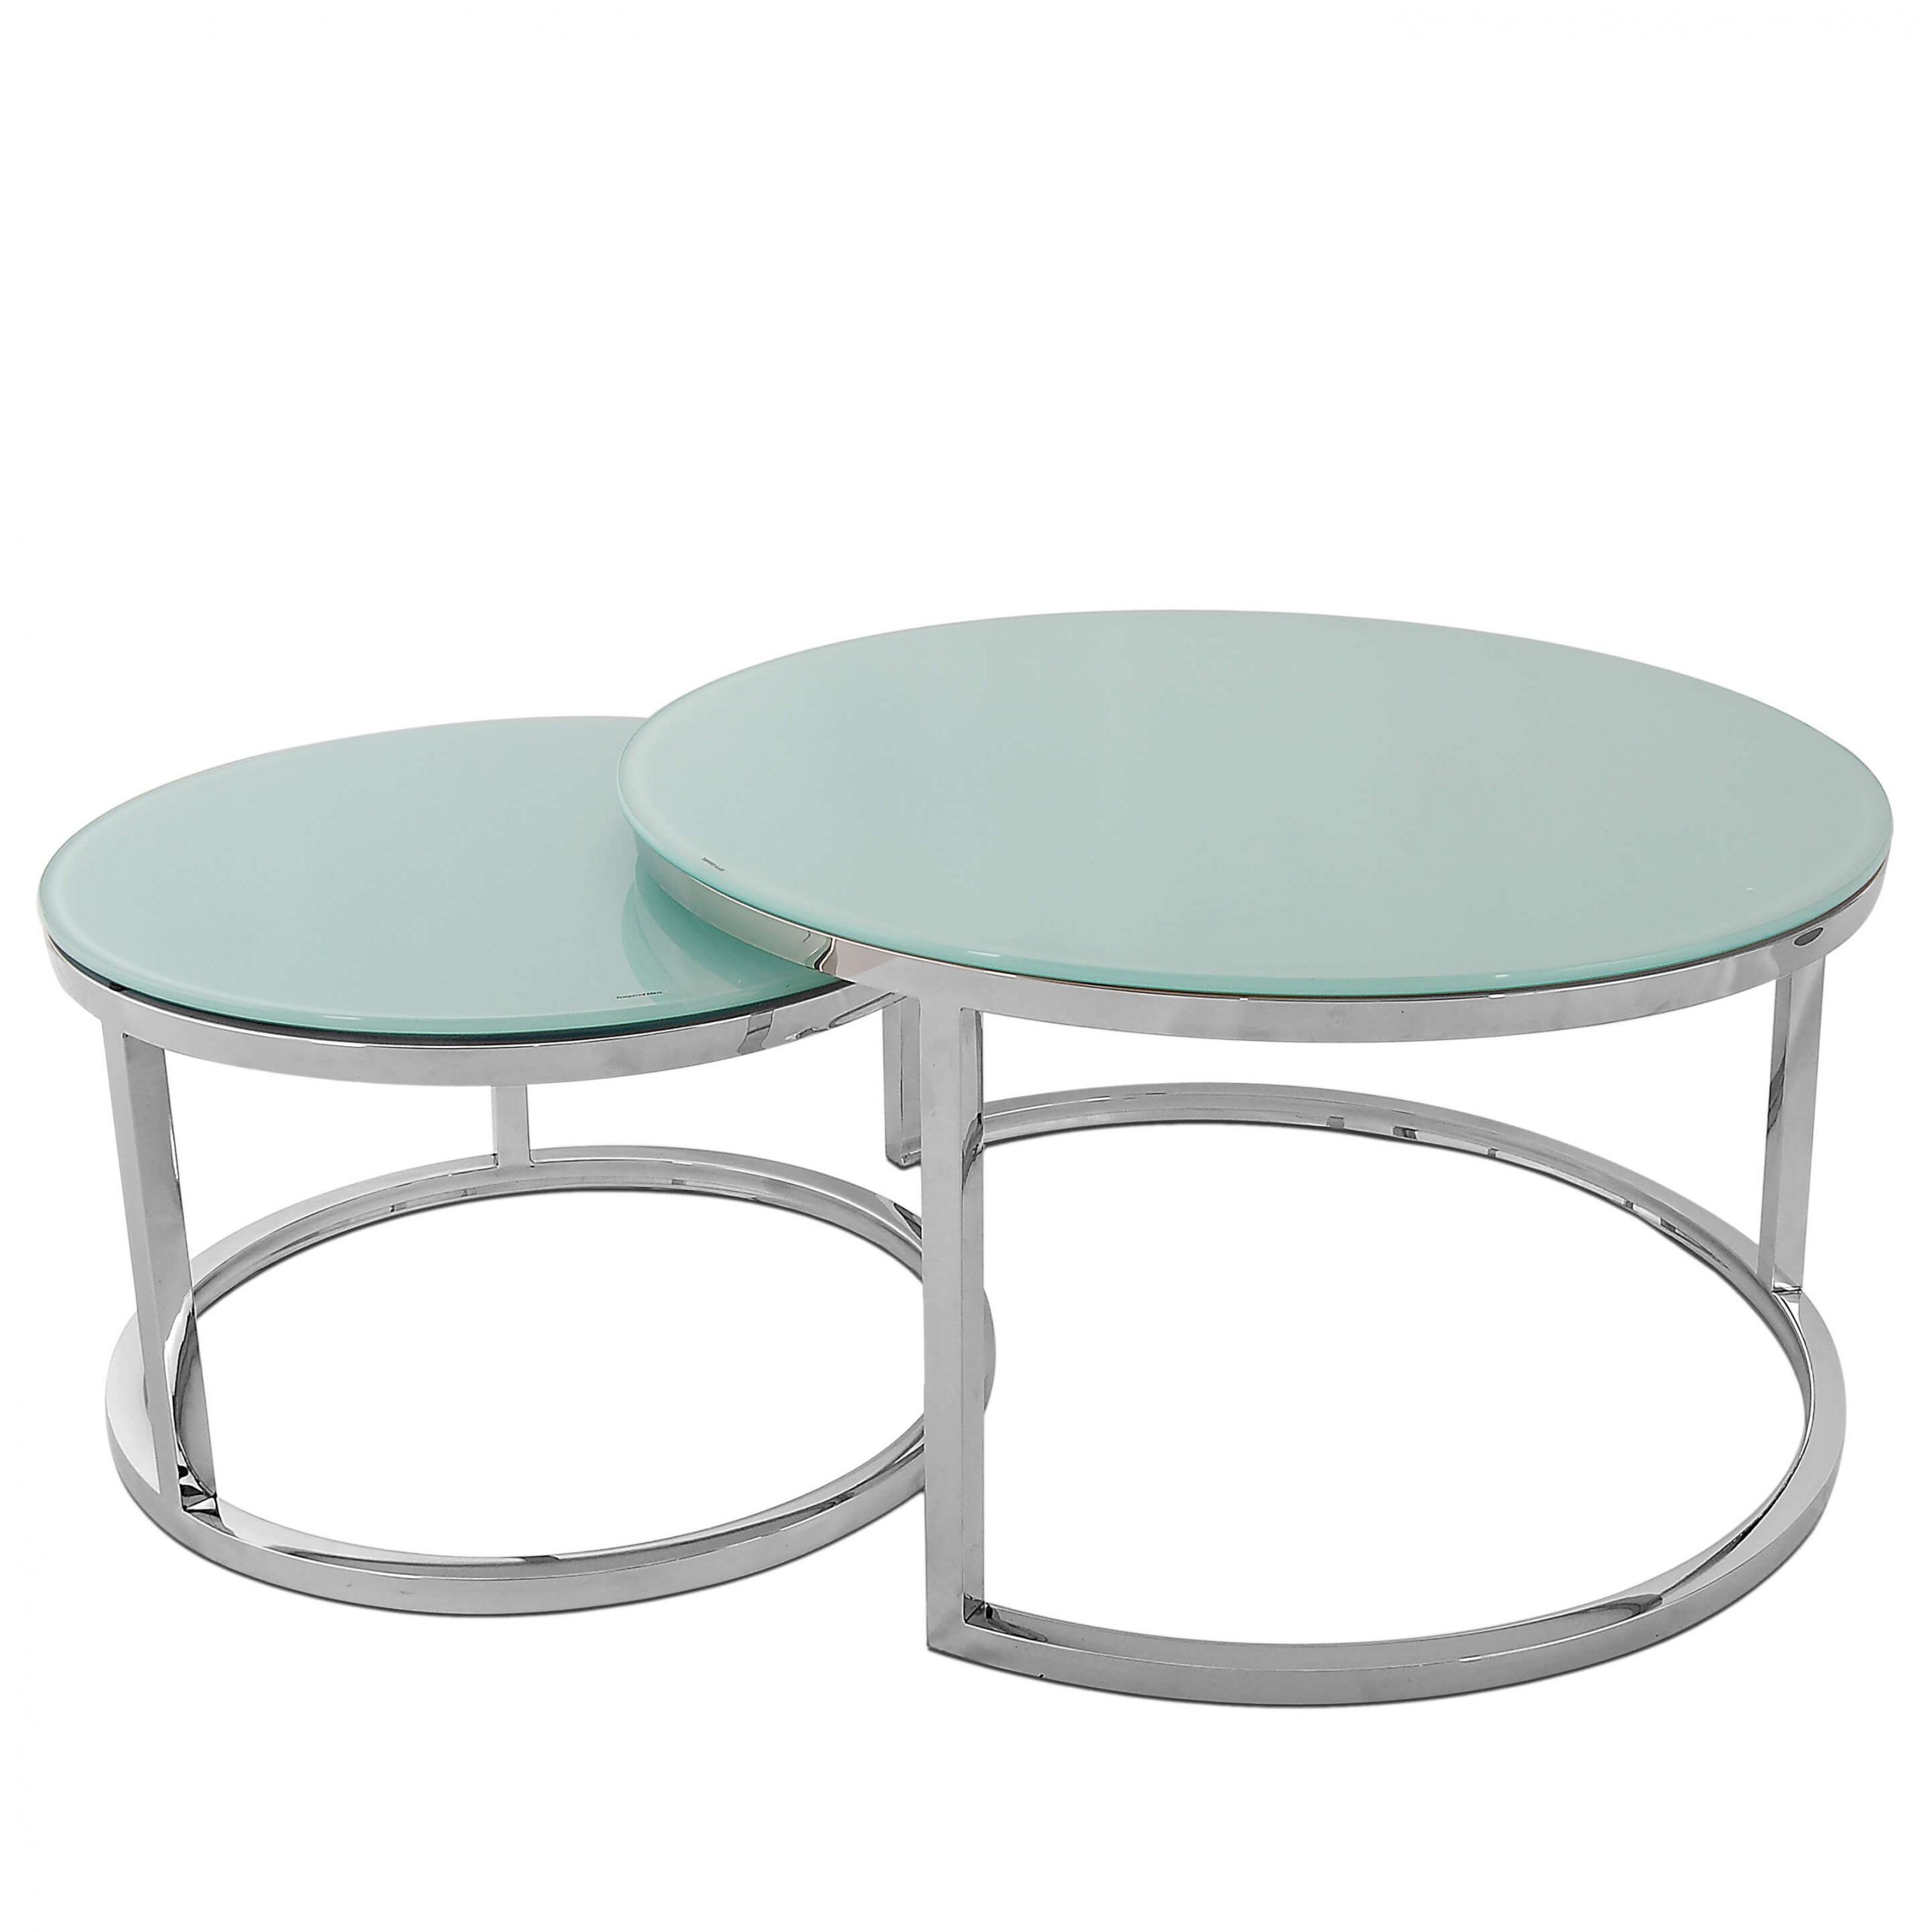 Eclipse A Set Of Two Stainless Steel Coffee Tables | Arte Dal Mondo With Brushed Stainless Steel Coffee Tables (View 6 of 20)